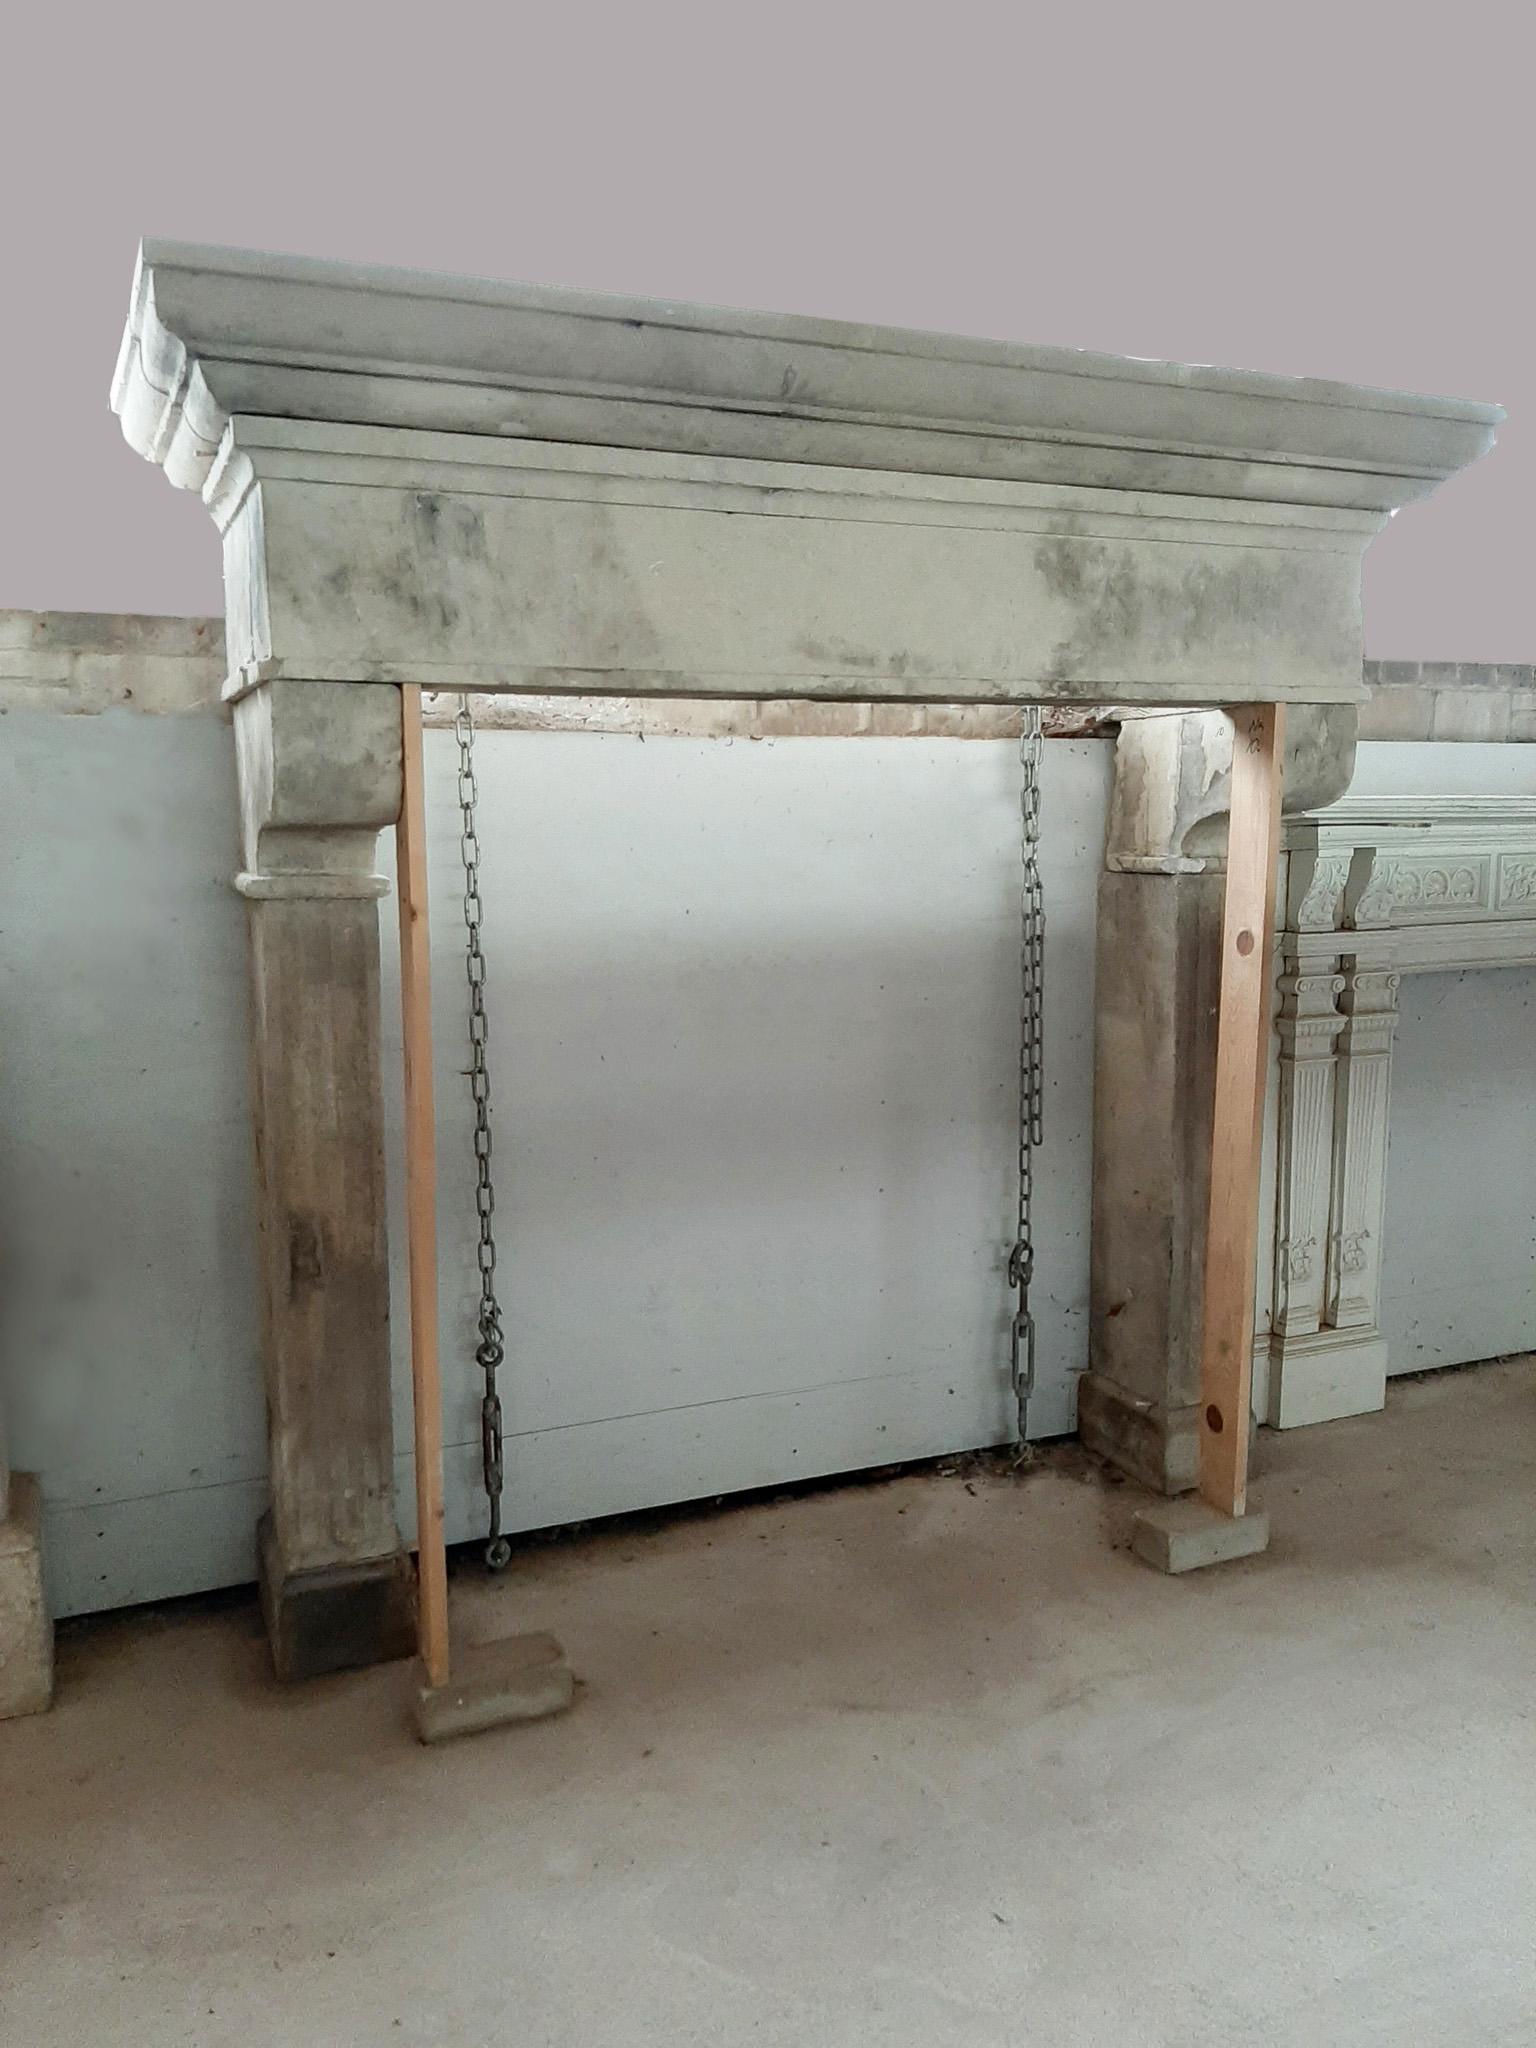 An Antique Italian Limestone Fireplace from the 19th century. With its substantial size, reminiscent of a castle hearth, and elegant fluted jambs, this fireplace is a striking addition to any space and brings a touch of historical charm to your